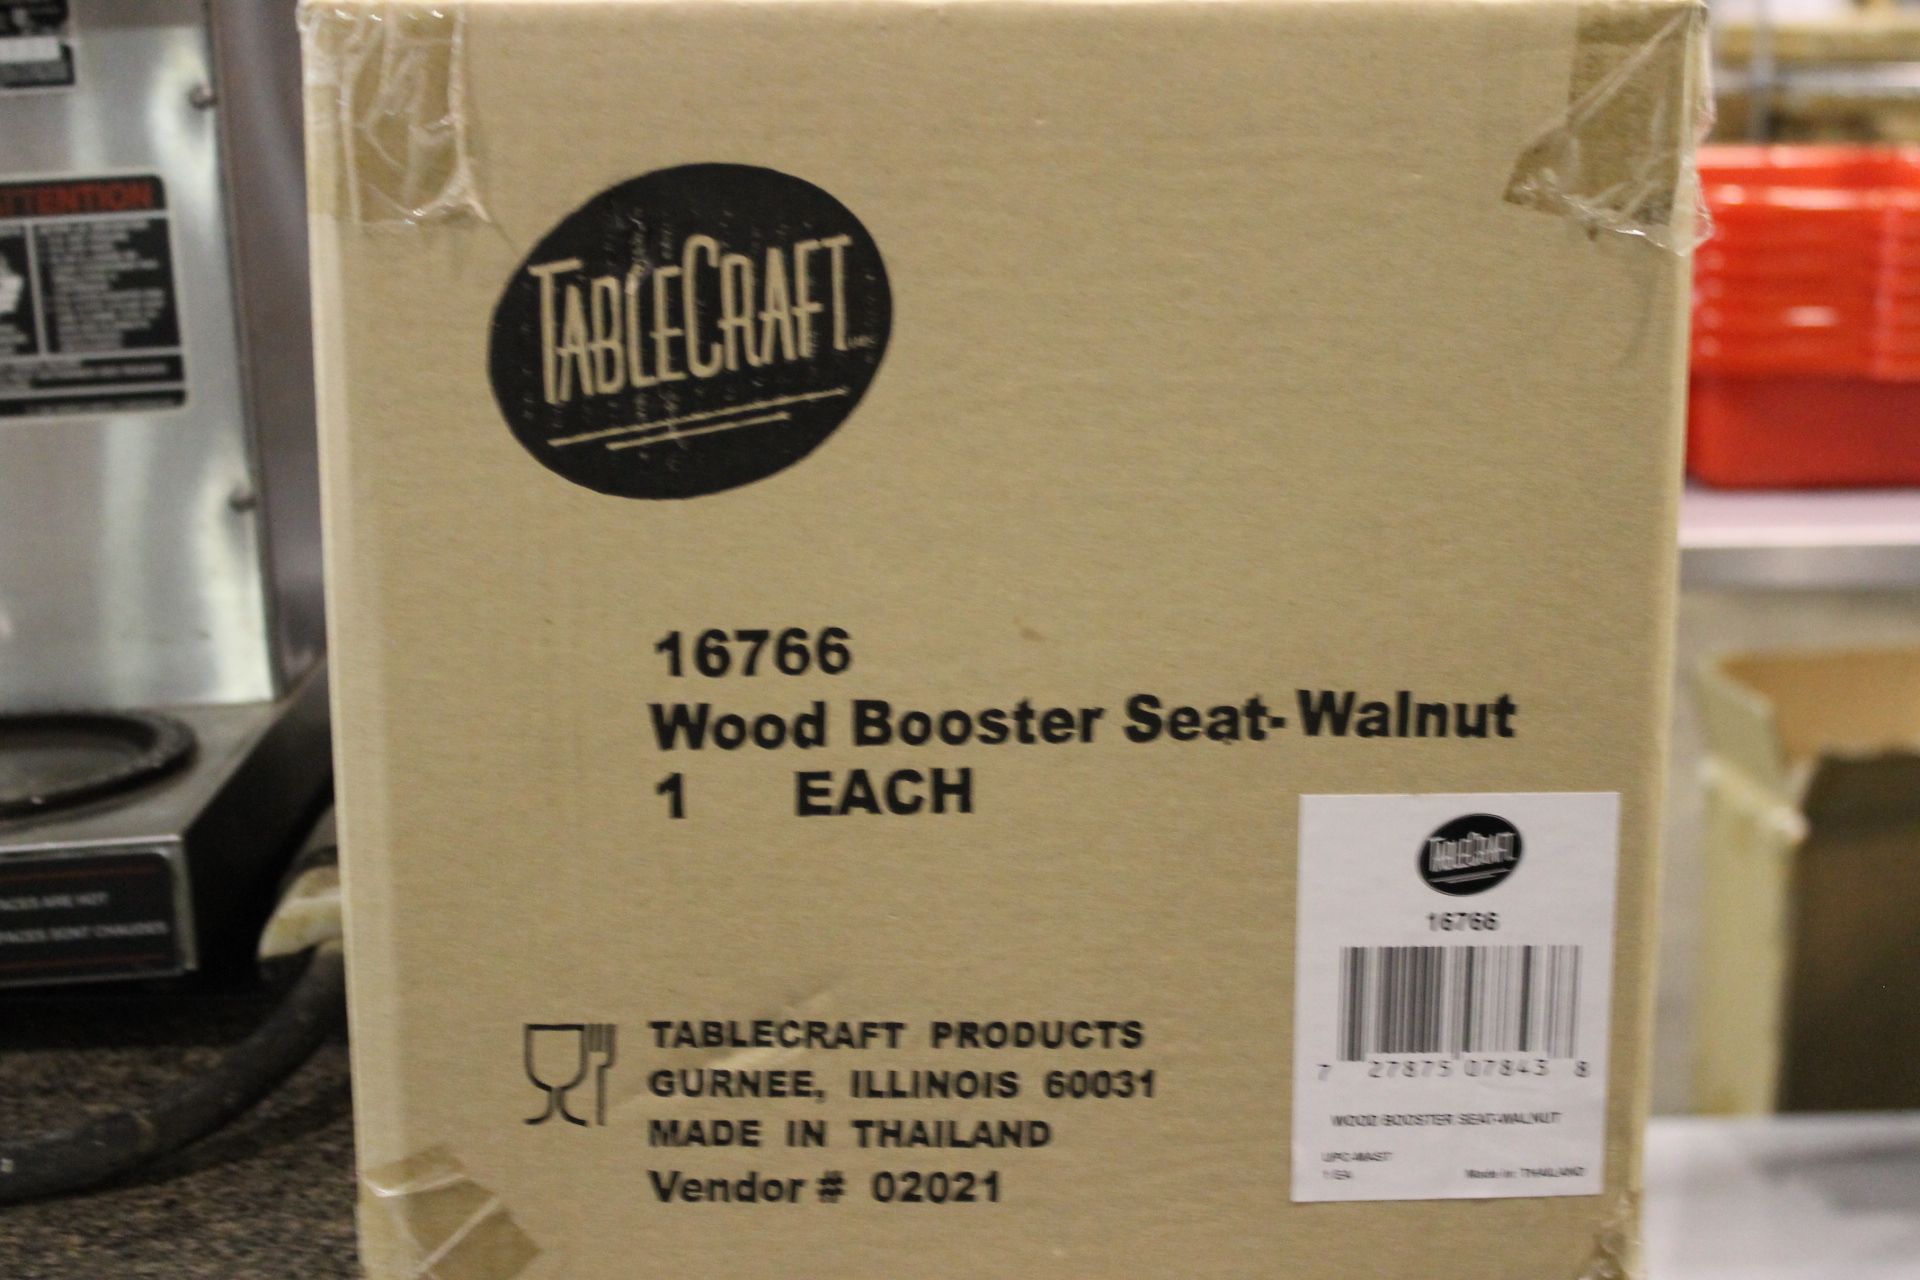 Tablecraft booster seats, model 16766 - lot of 2